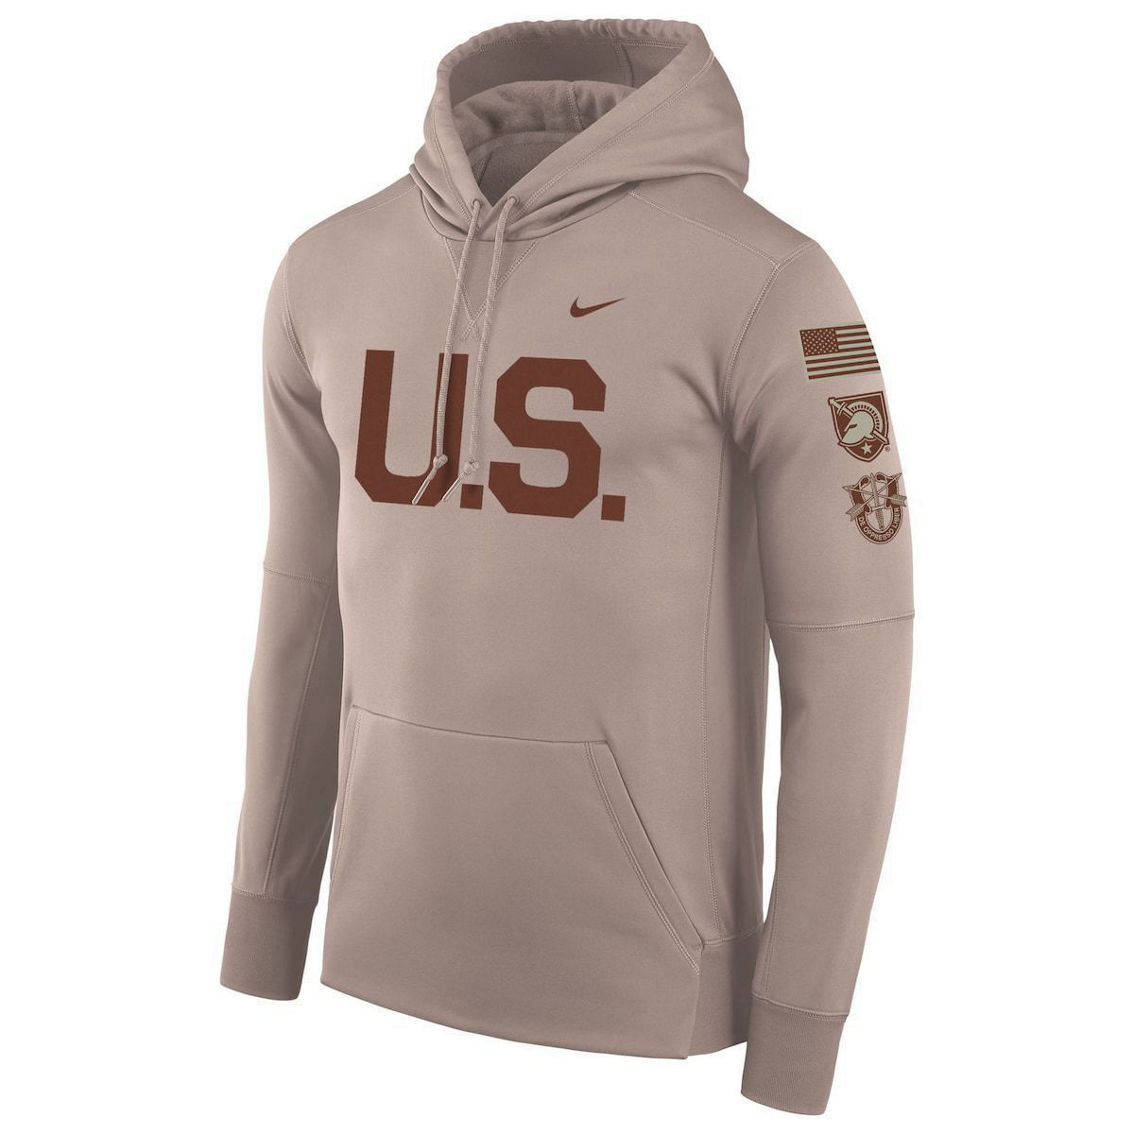 Nike Men's Oatmeal Army Black Knights Rivalry U.S. Therma Pullover Hoodie - Image 3 of 4